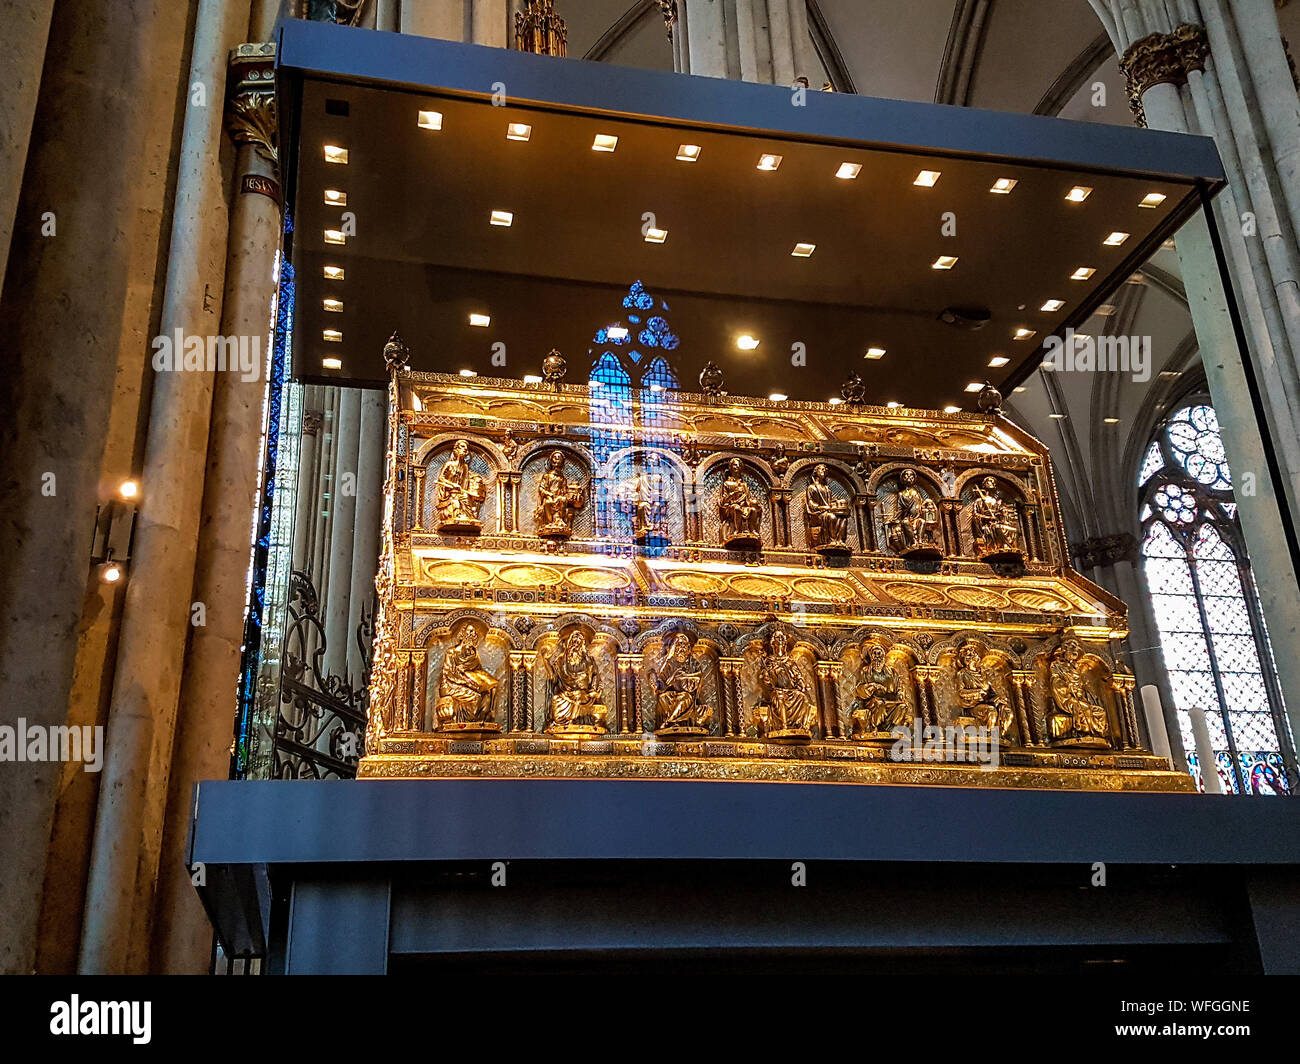 Shrine Of Three Kings In Cologne Cathedral Stock Photo